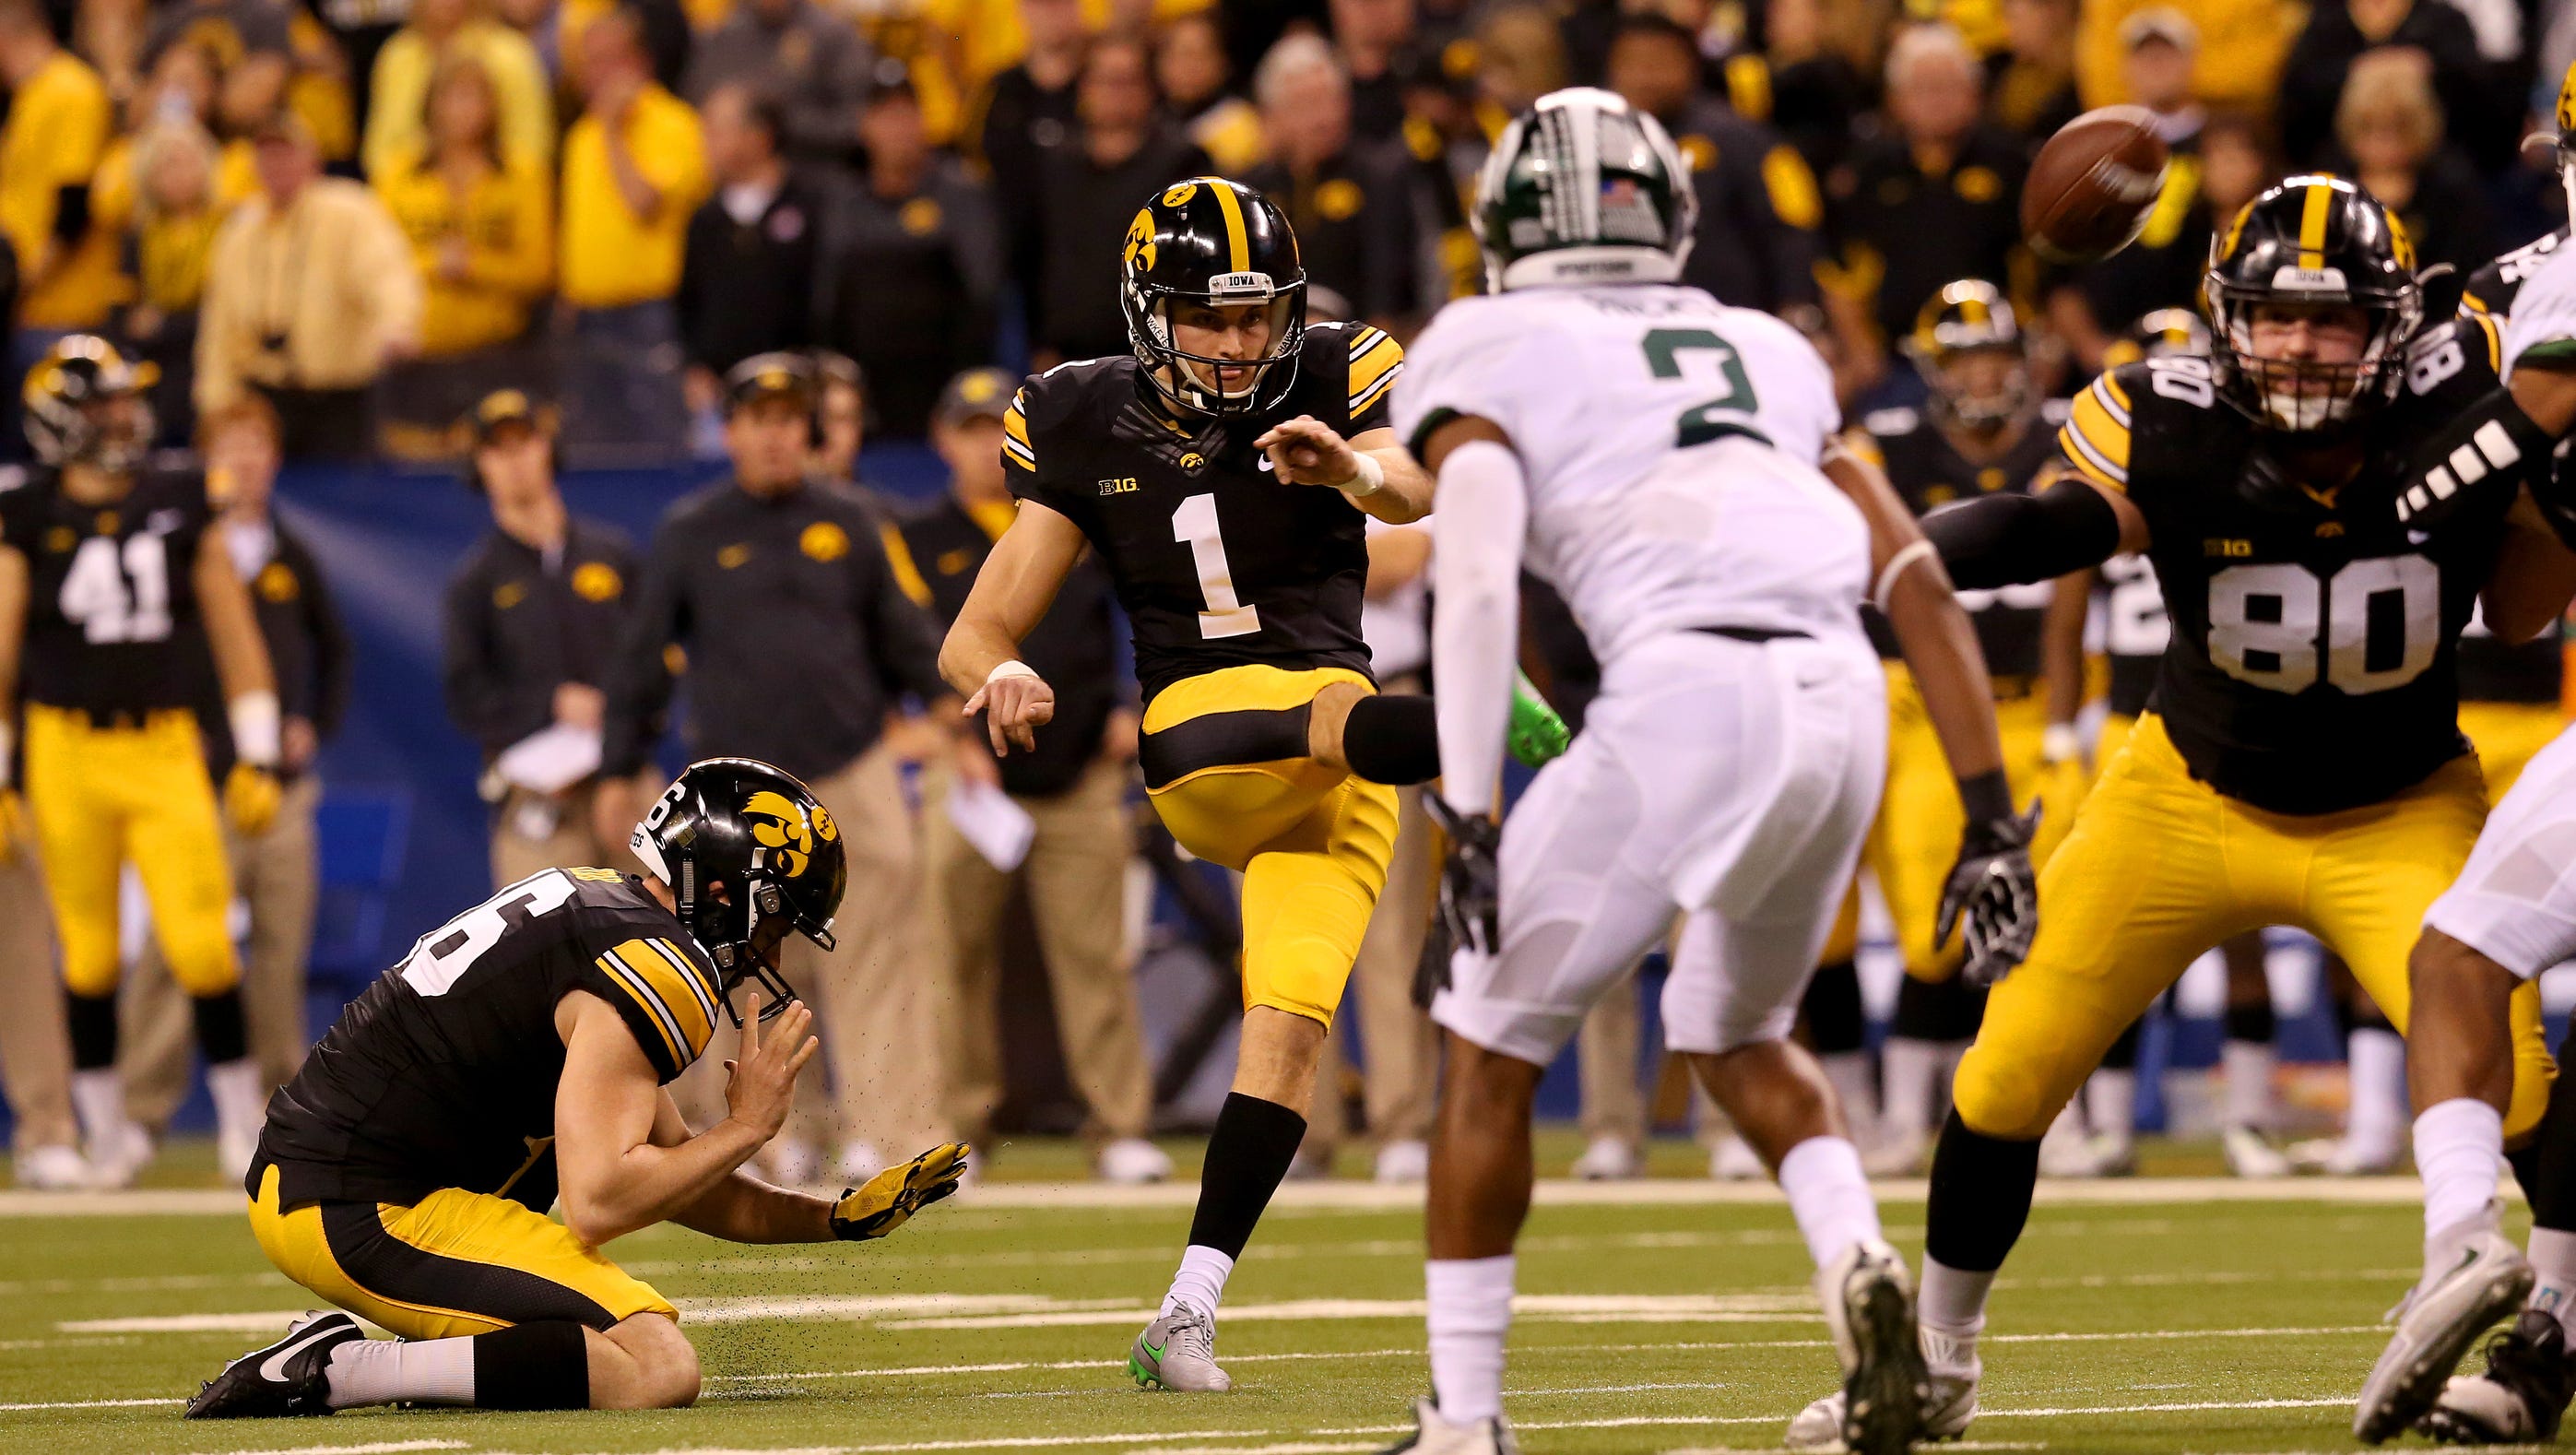 Iowa kicker Marshall Koehn (1) makes his first field goal in the first half against Michigan State during the Big Ten Championship Game at Lucas Oil Stadium on Dec. 5, 2015.